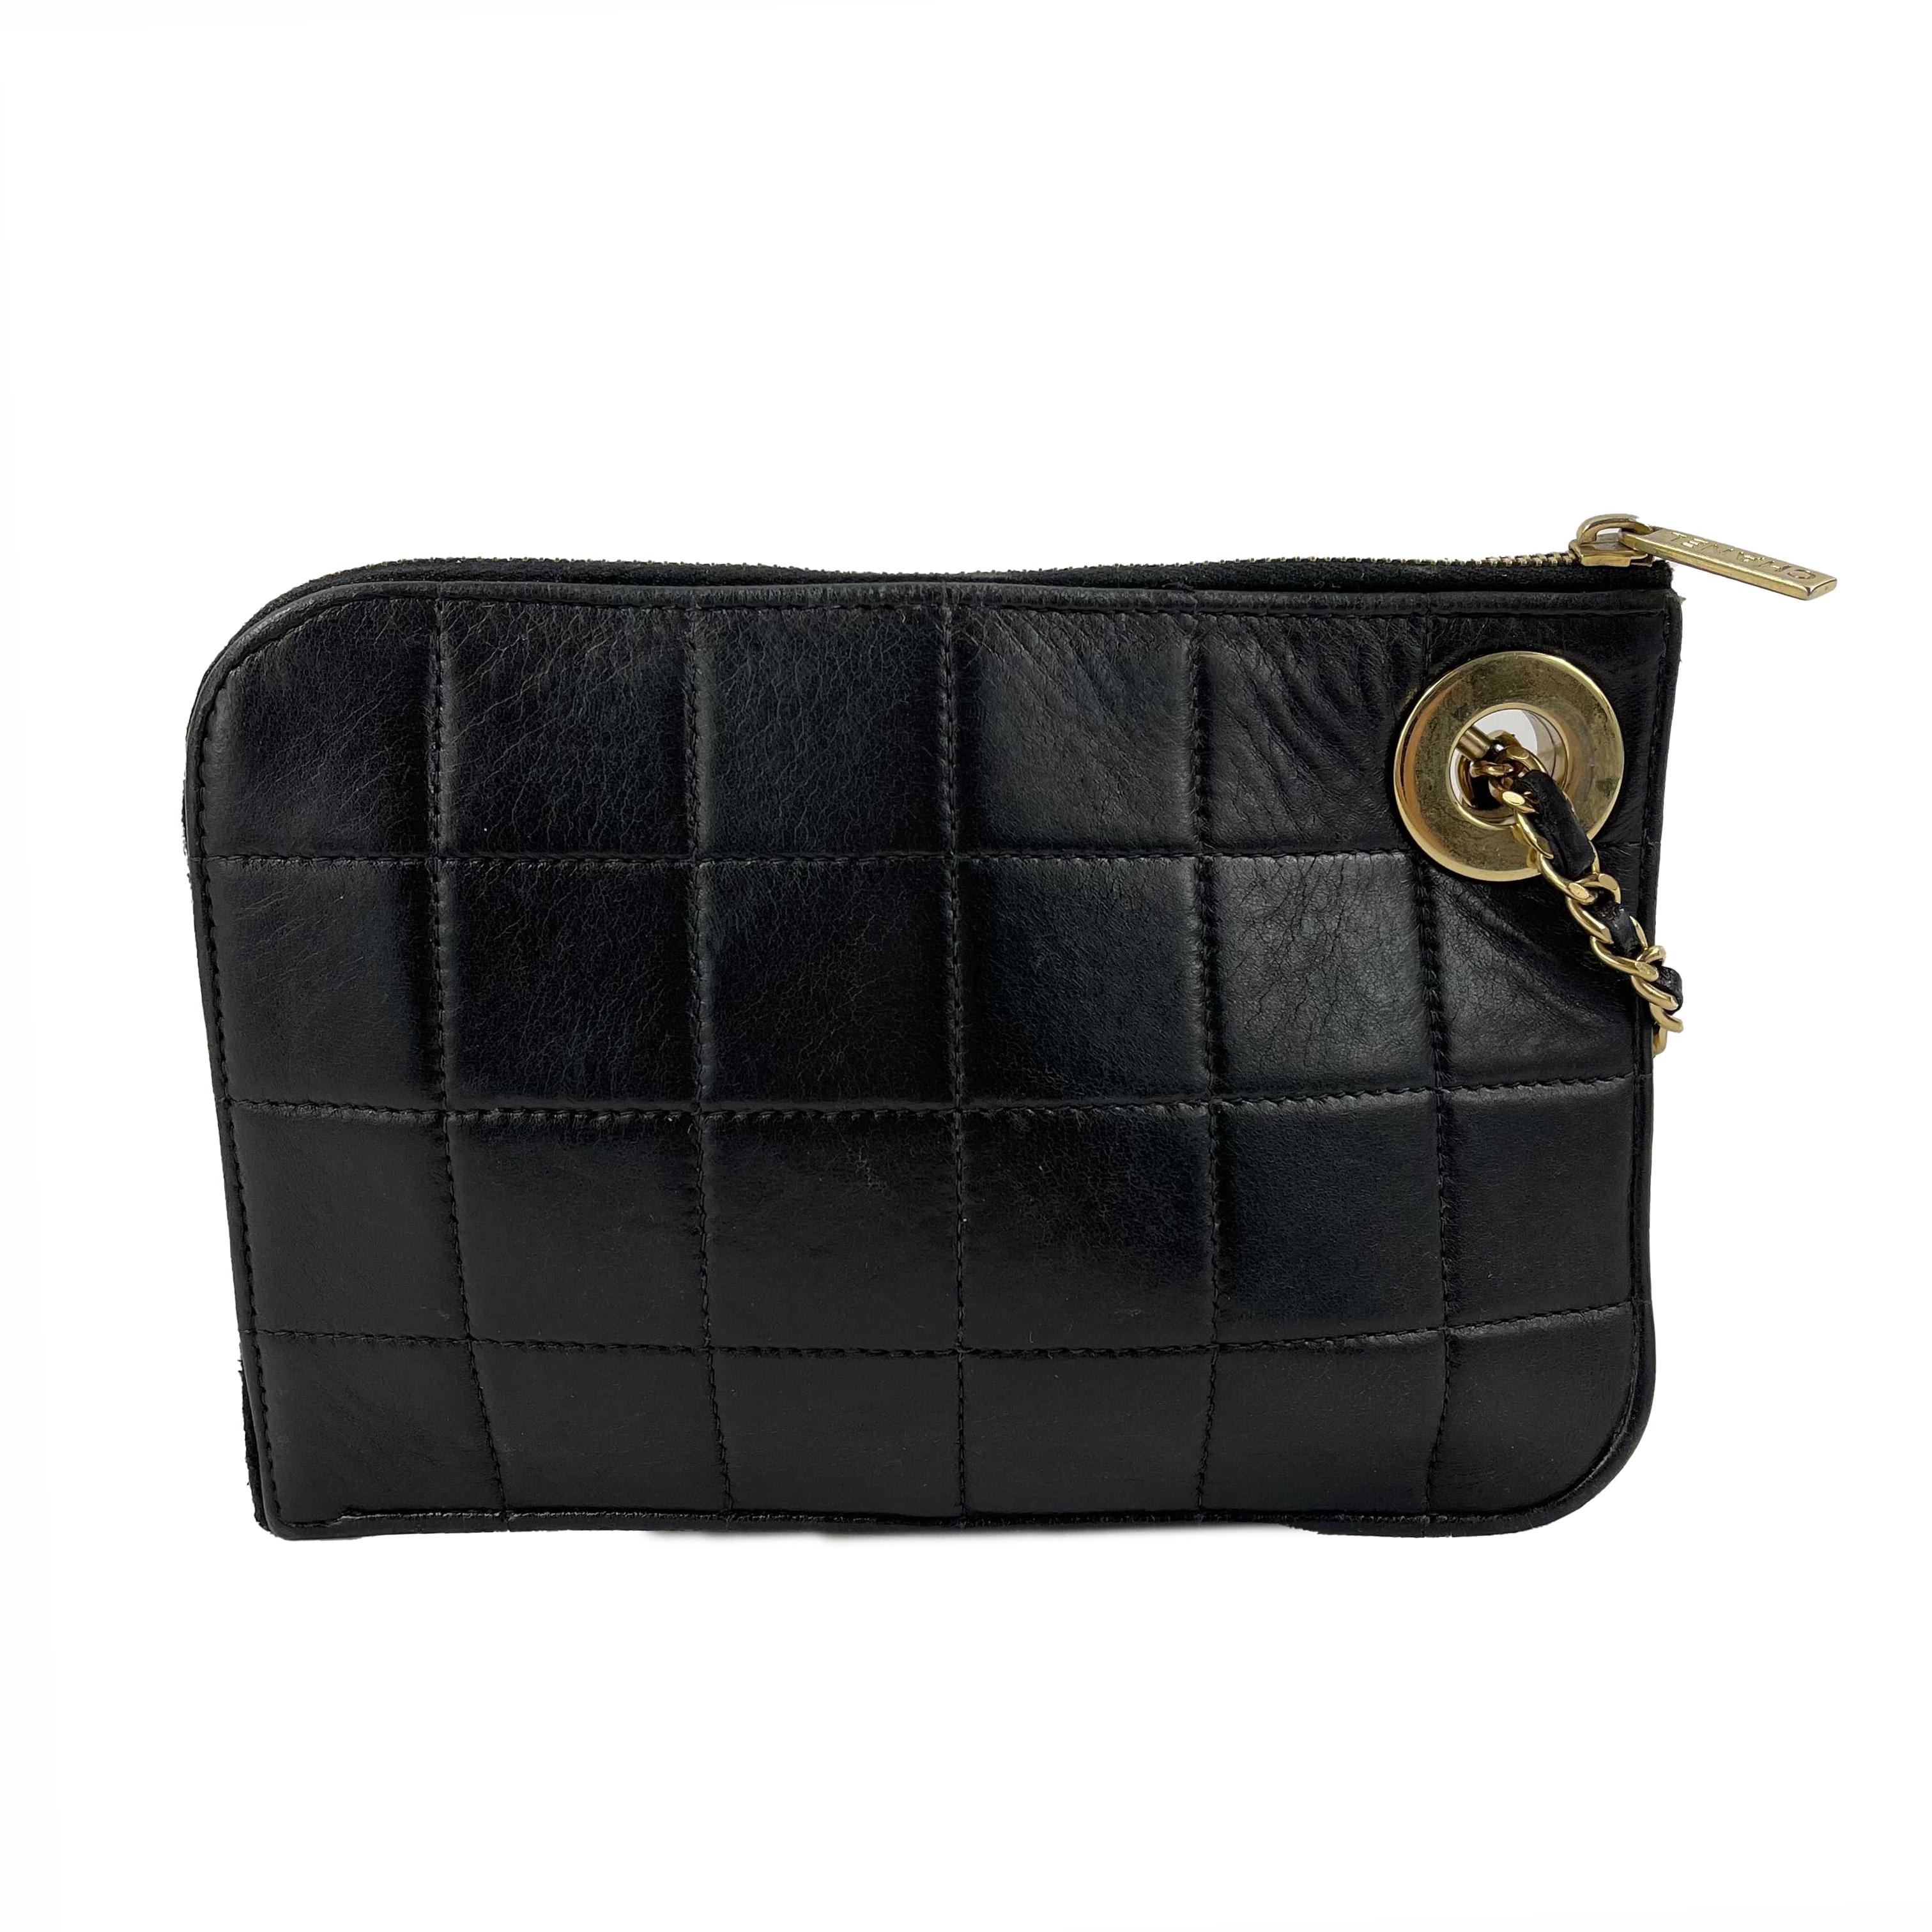 CHANEL - Vintage Mini Handcuff Wristlet Clutch - Black / Beige / Gold Ring 

Description

Vintage, Spring 2002 Collection by Karl Lagerfeld
Quilted Pattern
Gold-Tone Hardware
Wrist Strap with Handcuff
Leather Lining & Single Interior Pocket
Zip